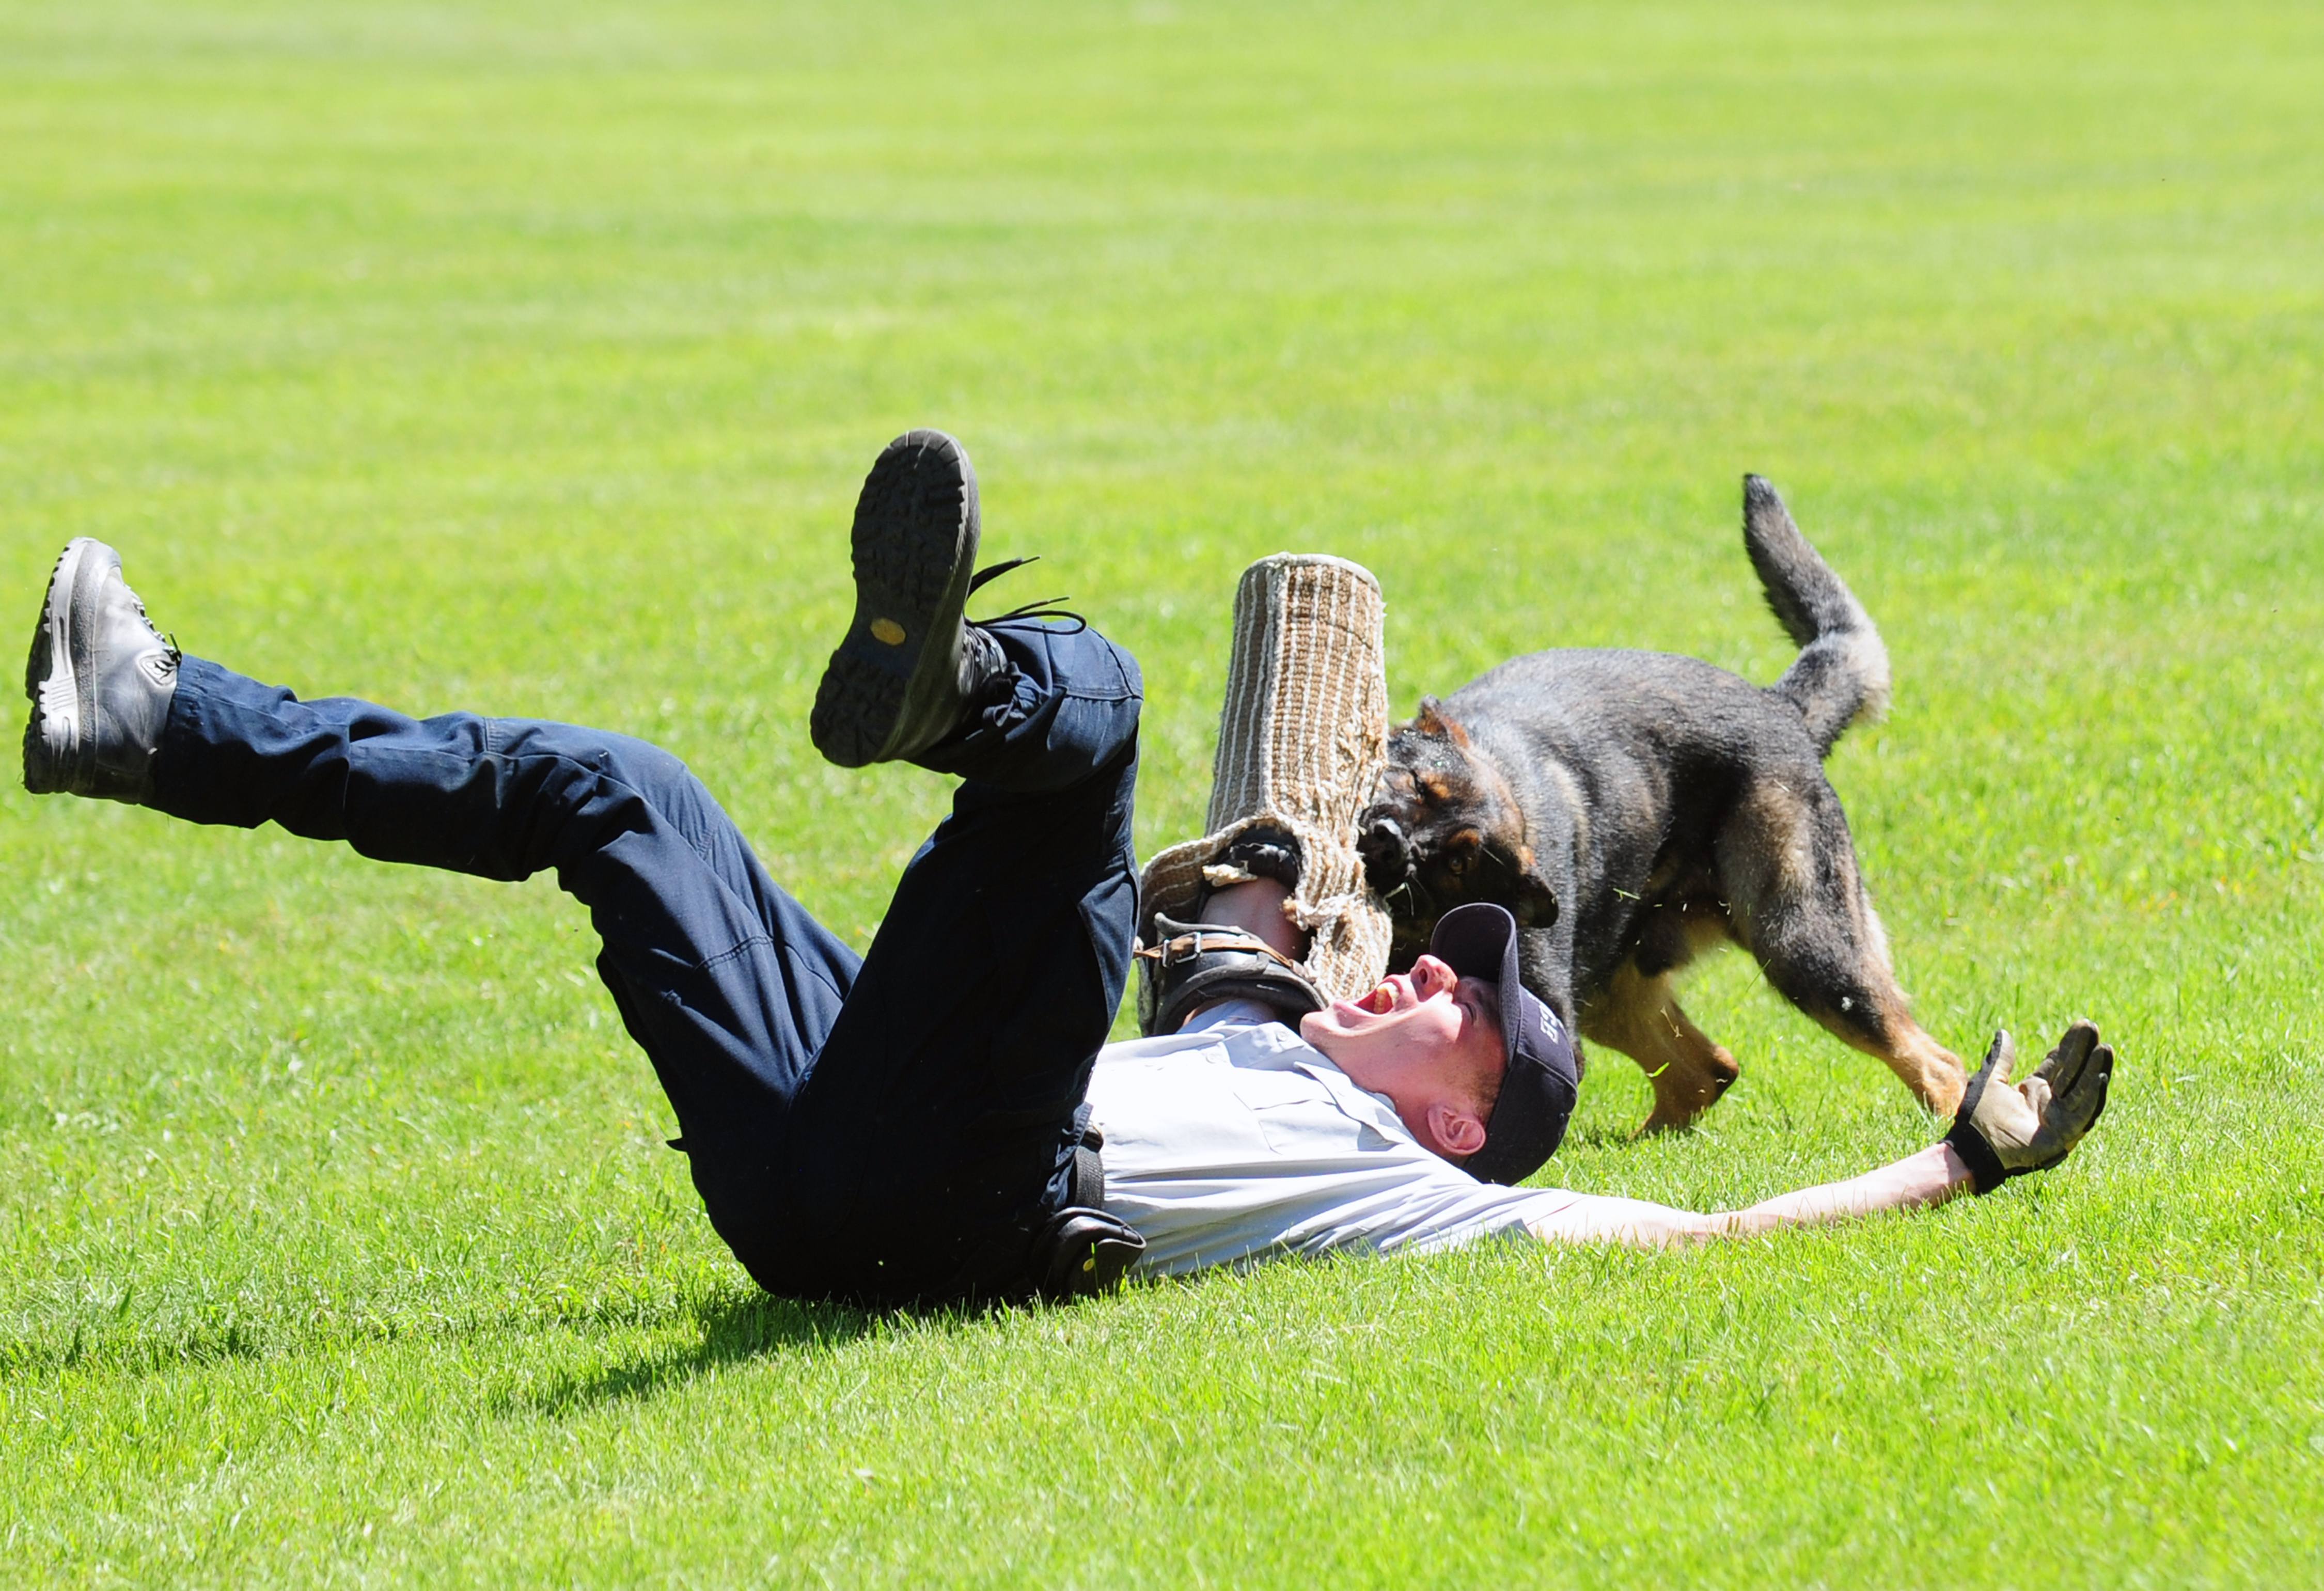 IN TRAINING- The RCMP dogs show off their stuff during a public show at the Innisfail RCMP Dog Training Centre. Demonstrations run Wednesdays at 1 p.m.